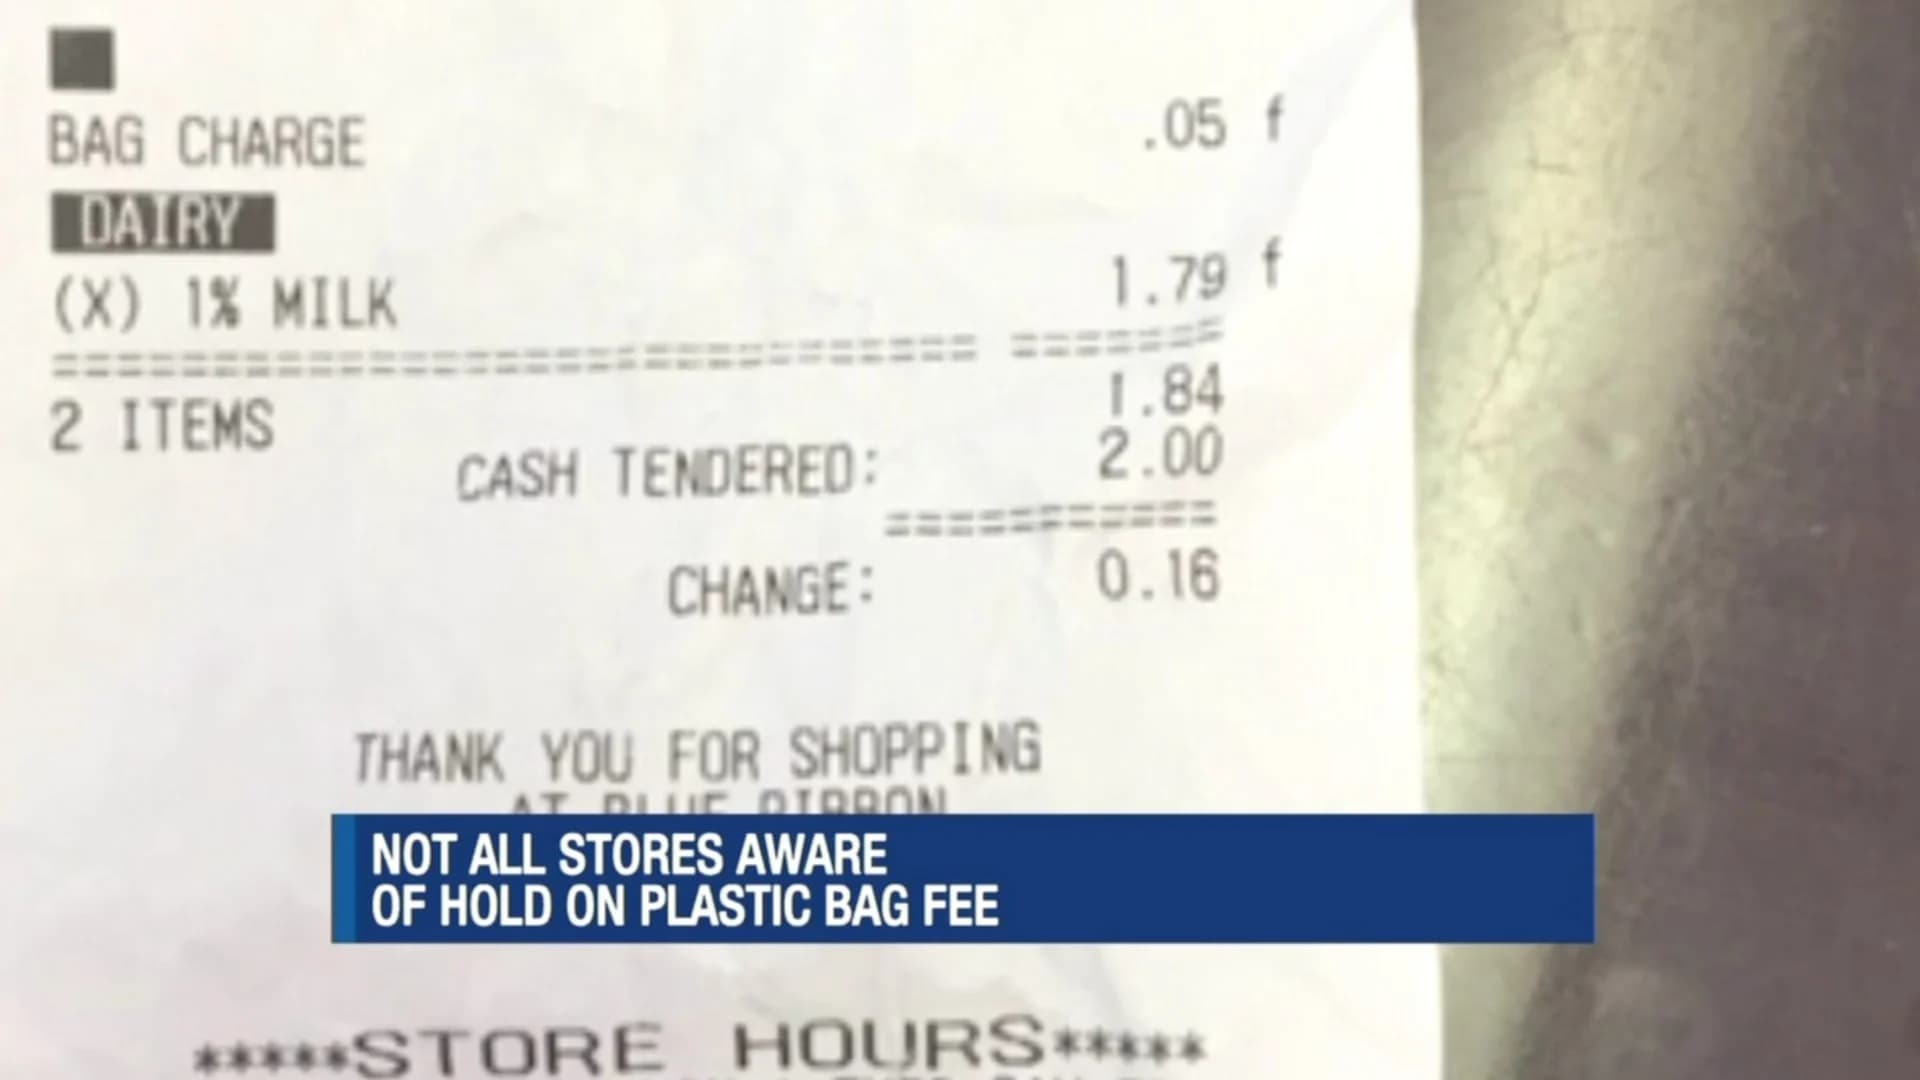 Some grocery stores unaware of hold on bag fee